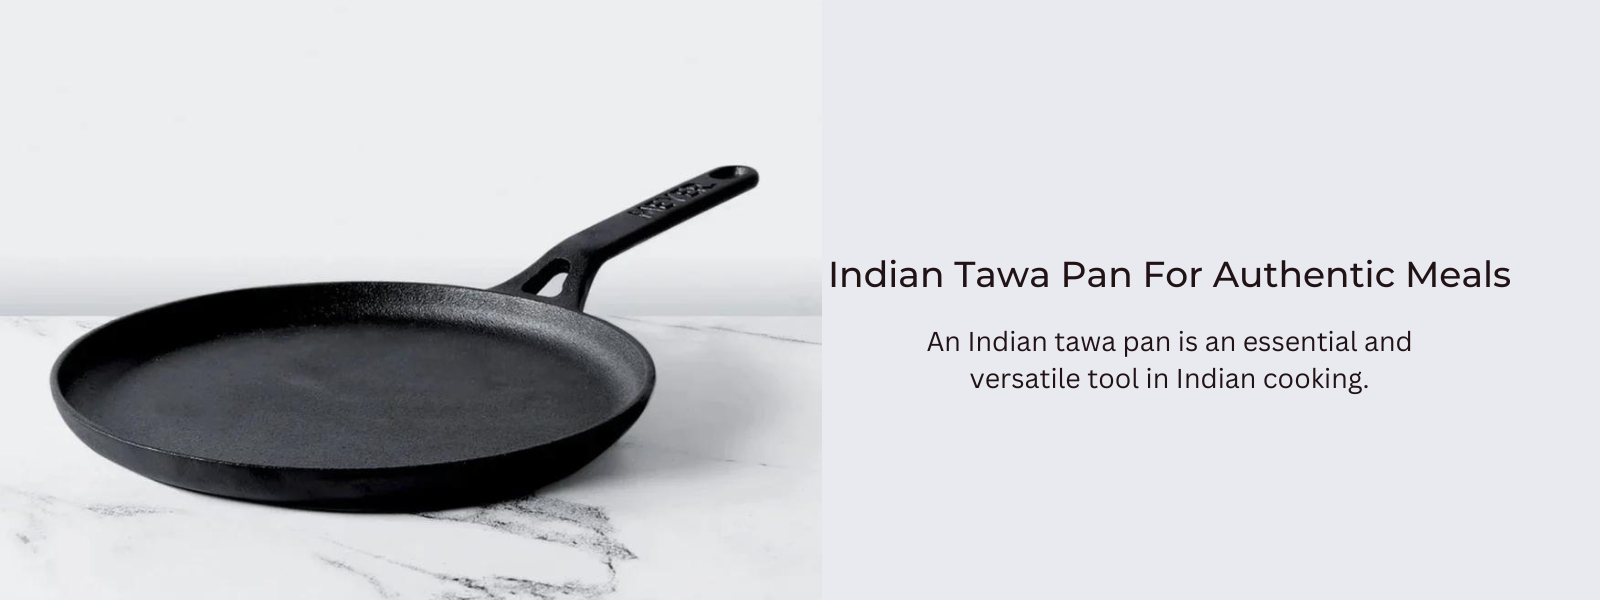 Indian Tawa Pan For Authentic Meals - PotsandPans India